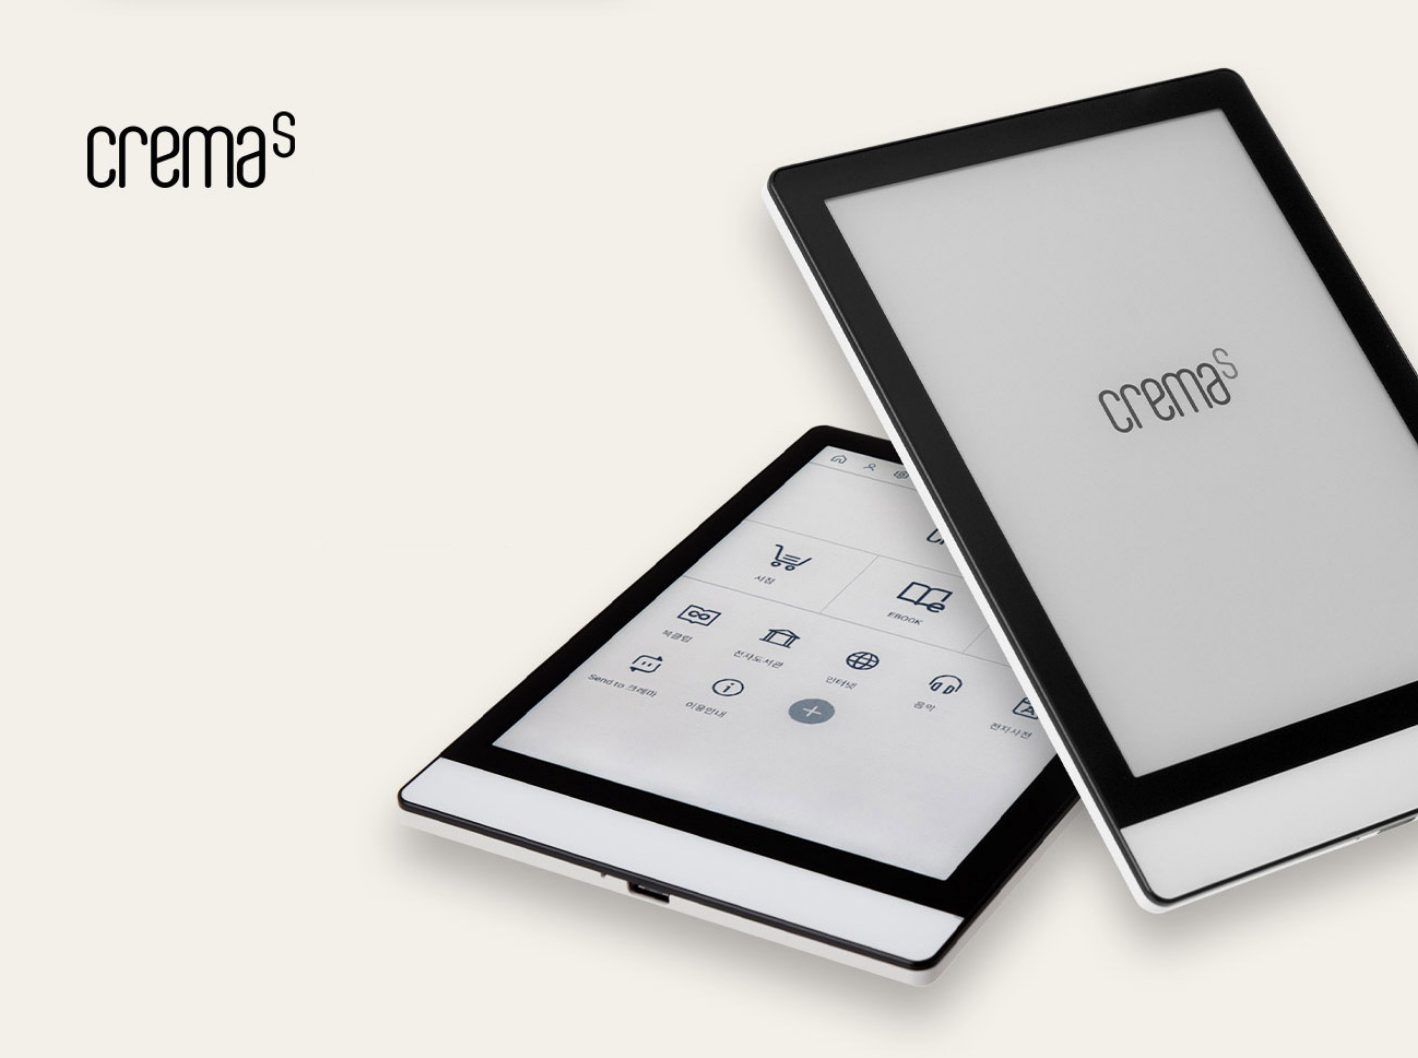 South Korea based bookstore Yes24 launches new Crema S E-Ink e-reader